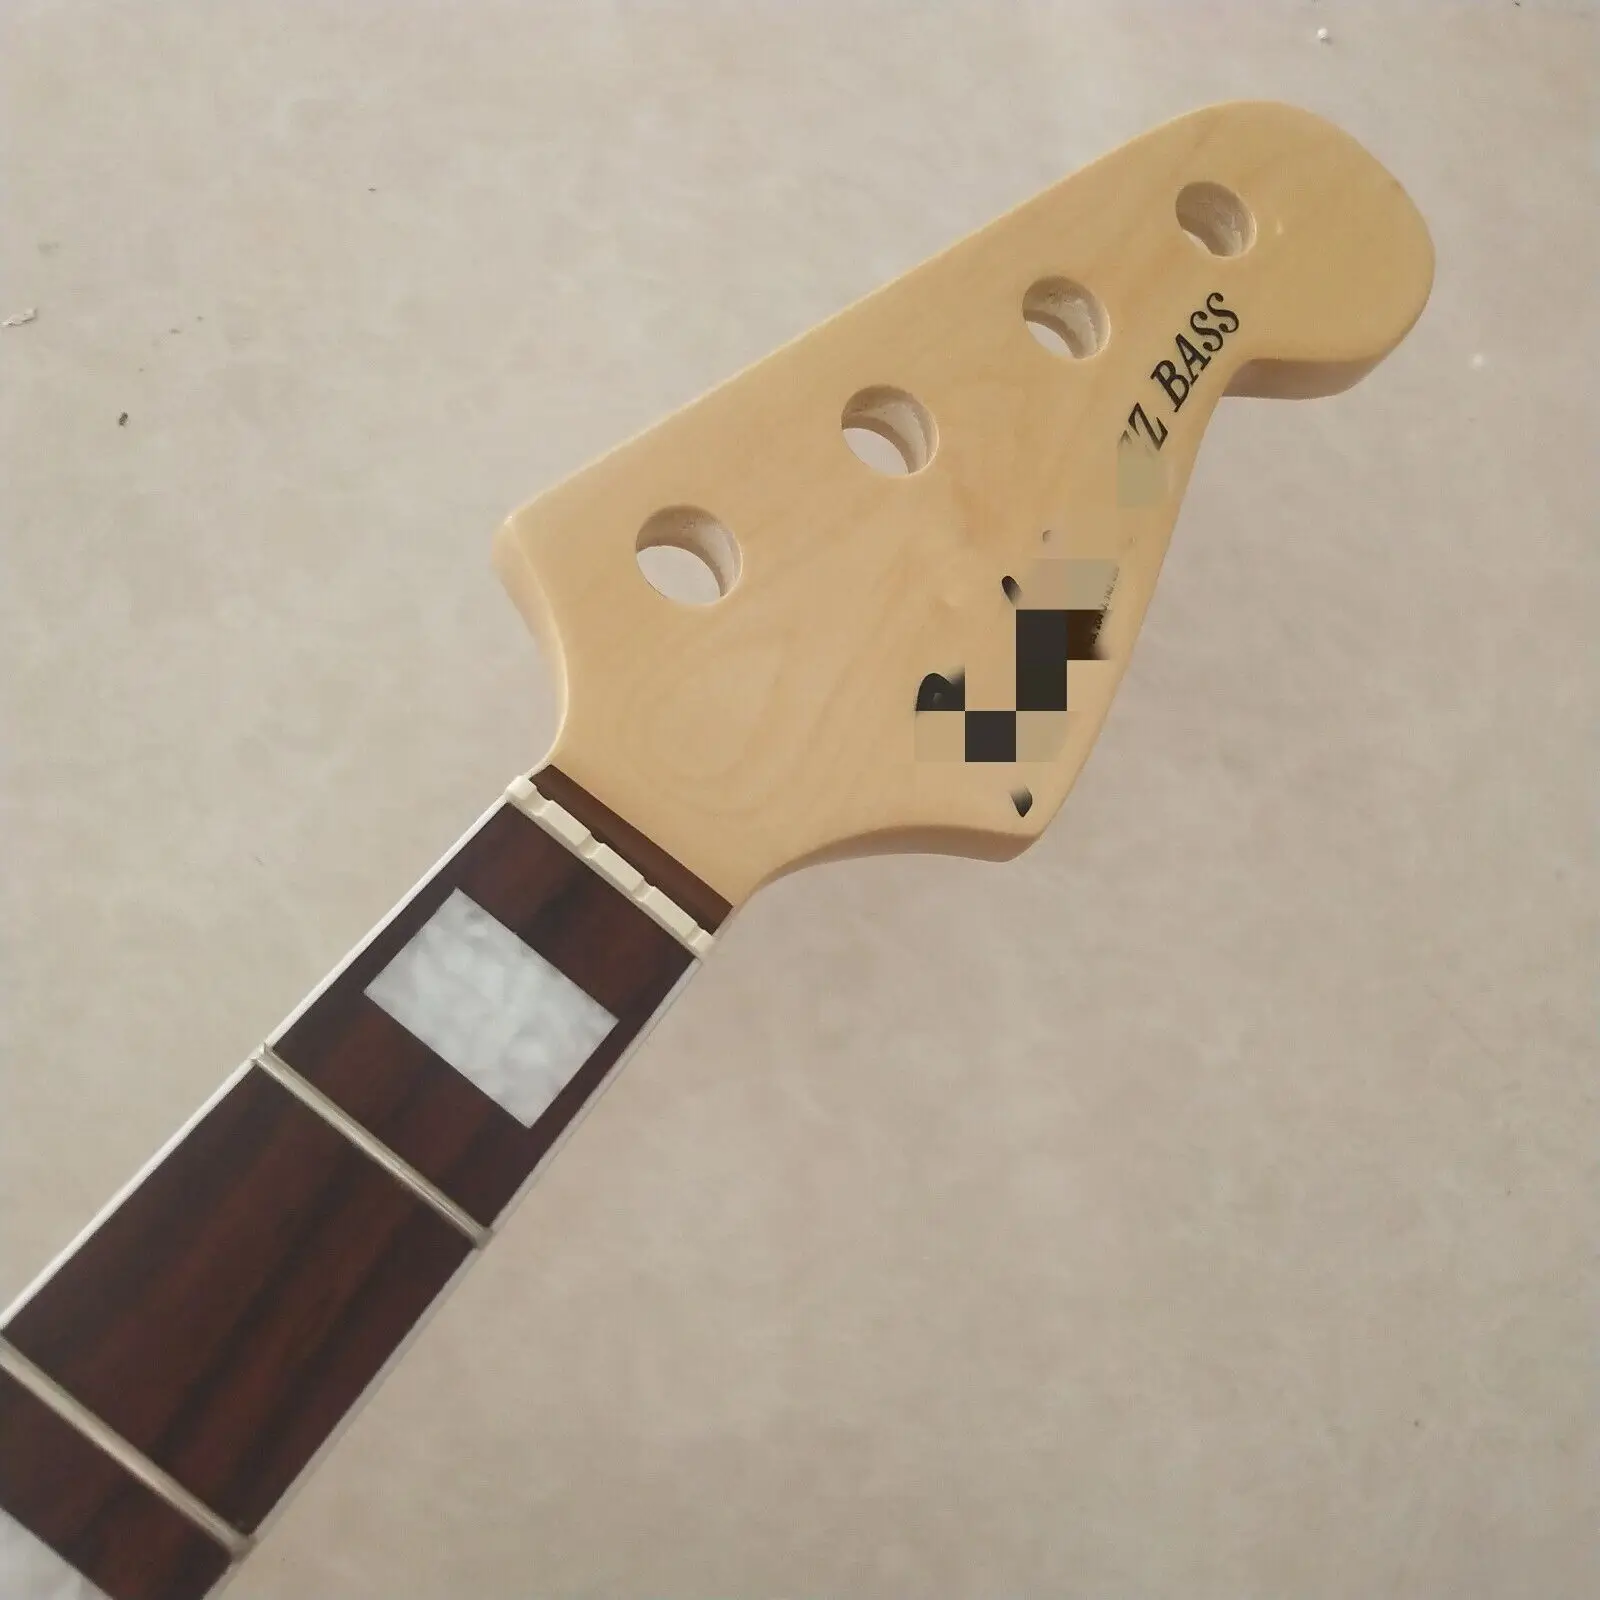 Replace Jazz bass guitar neck parts 20fret 34inch Rosewood Fretboard Block Inlay